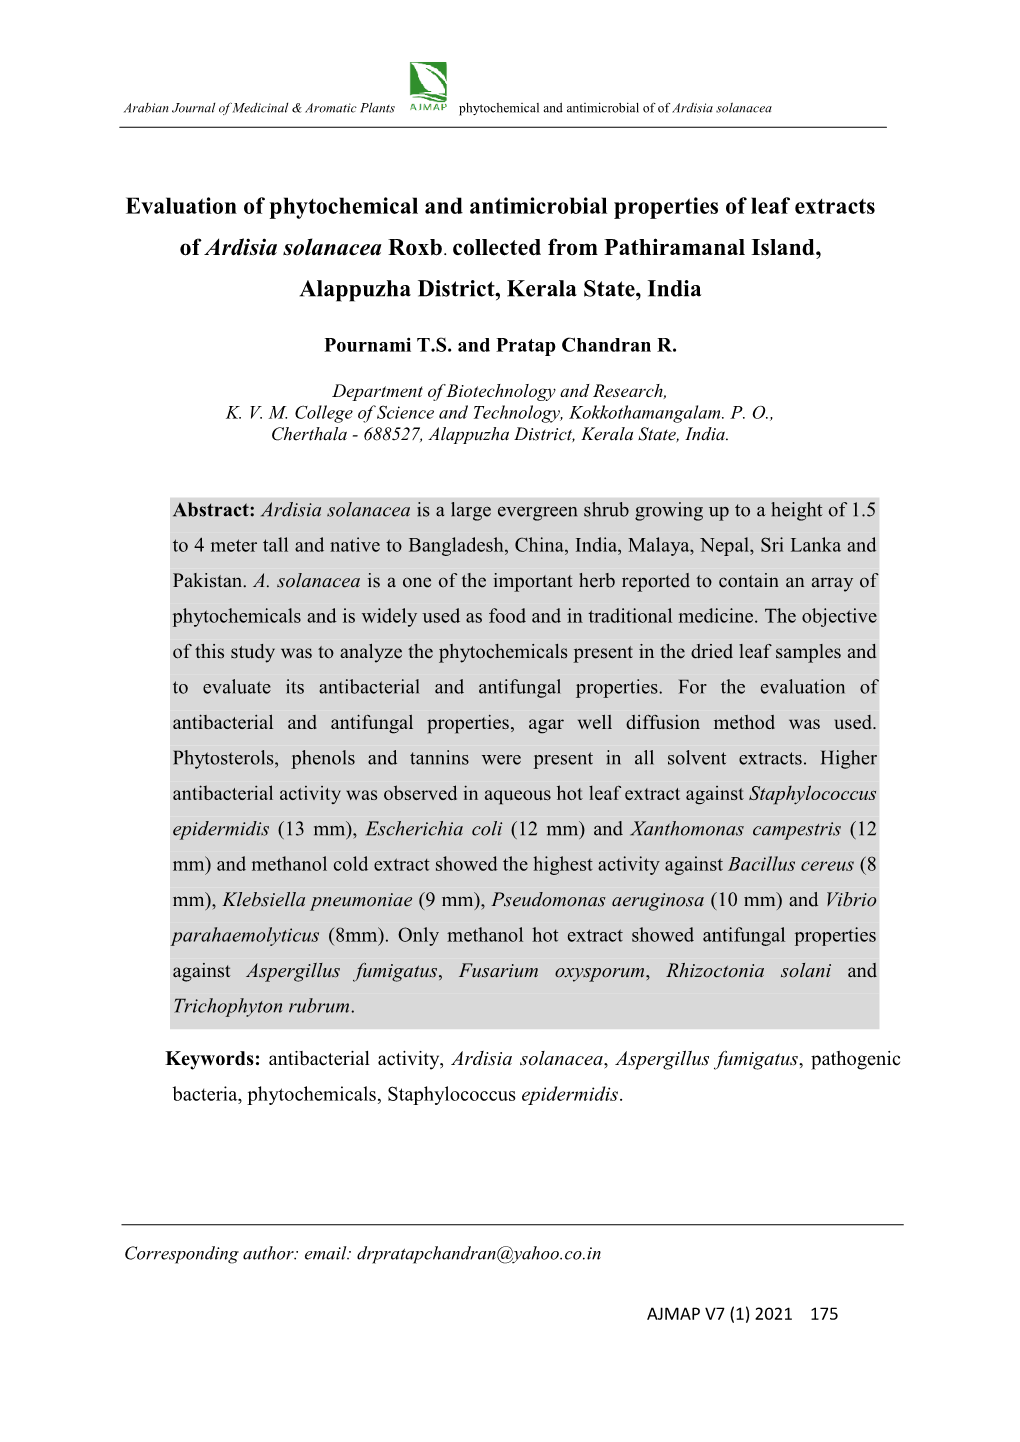 Evaluation of Phytochemical and Antimicrobial Properties of Leaf Extracts